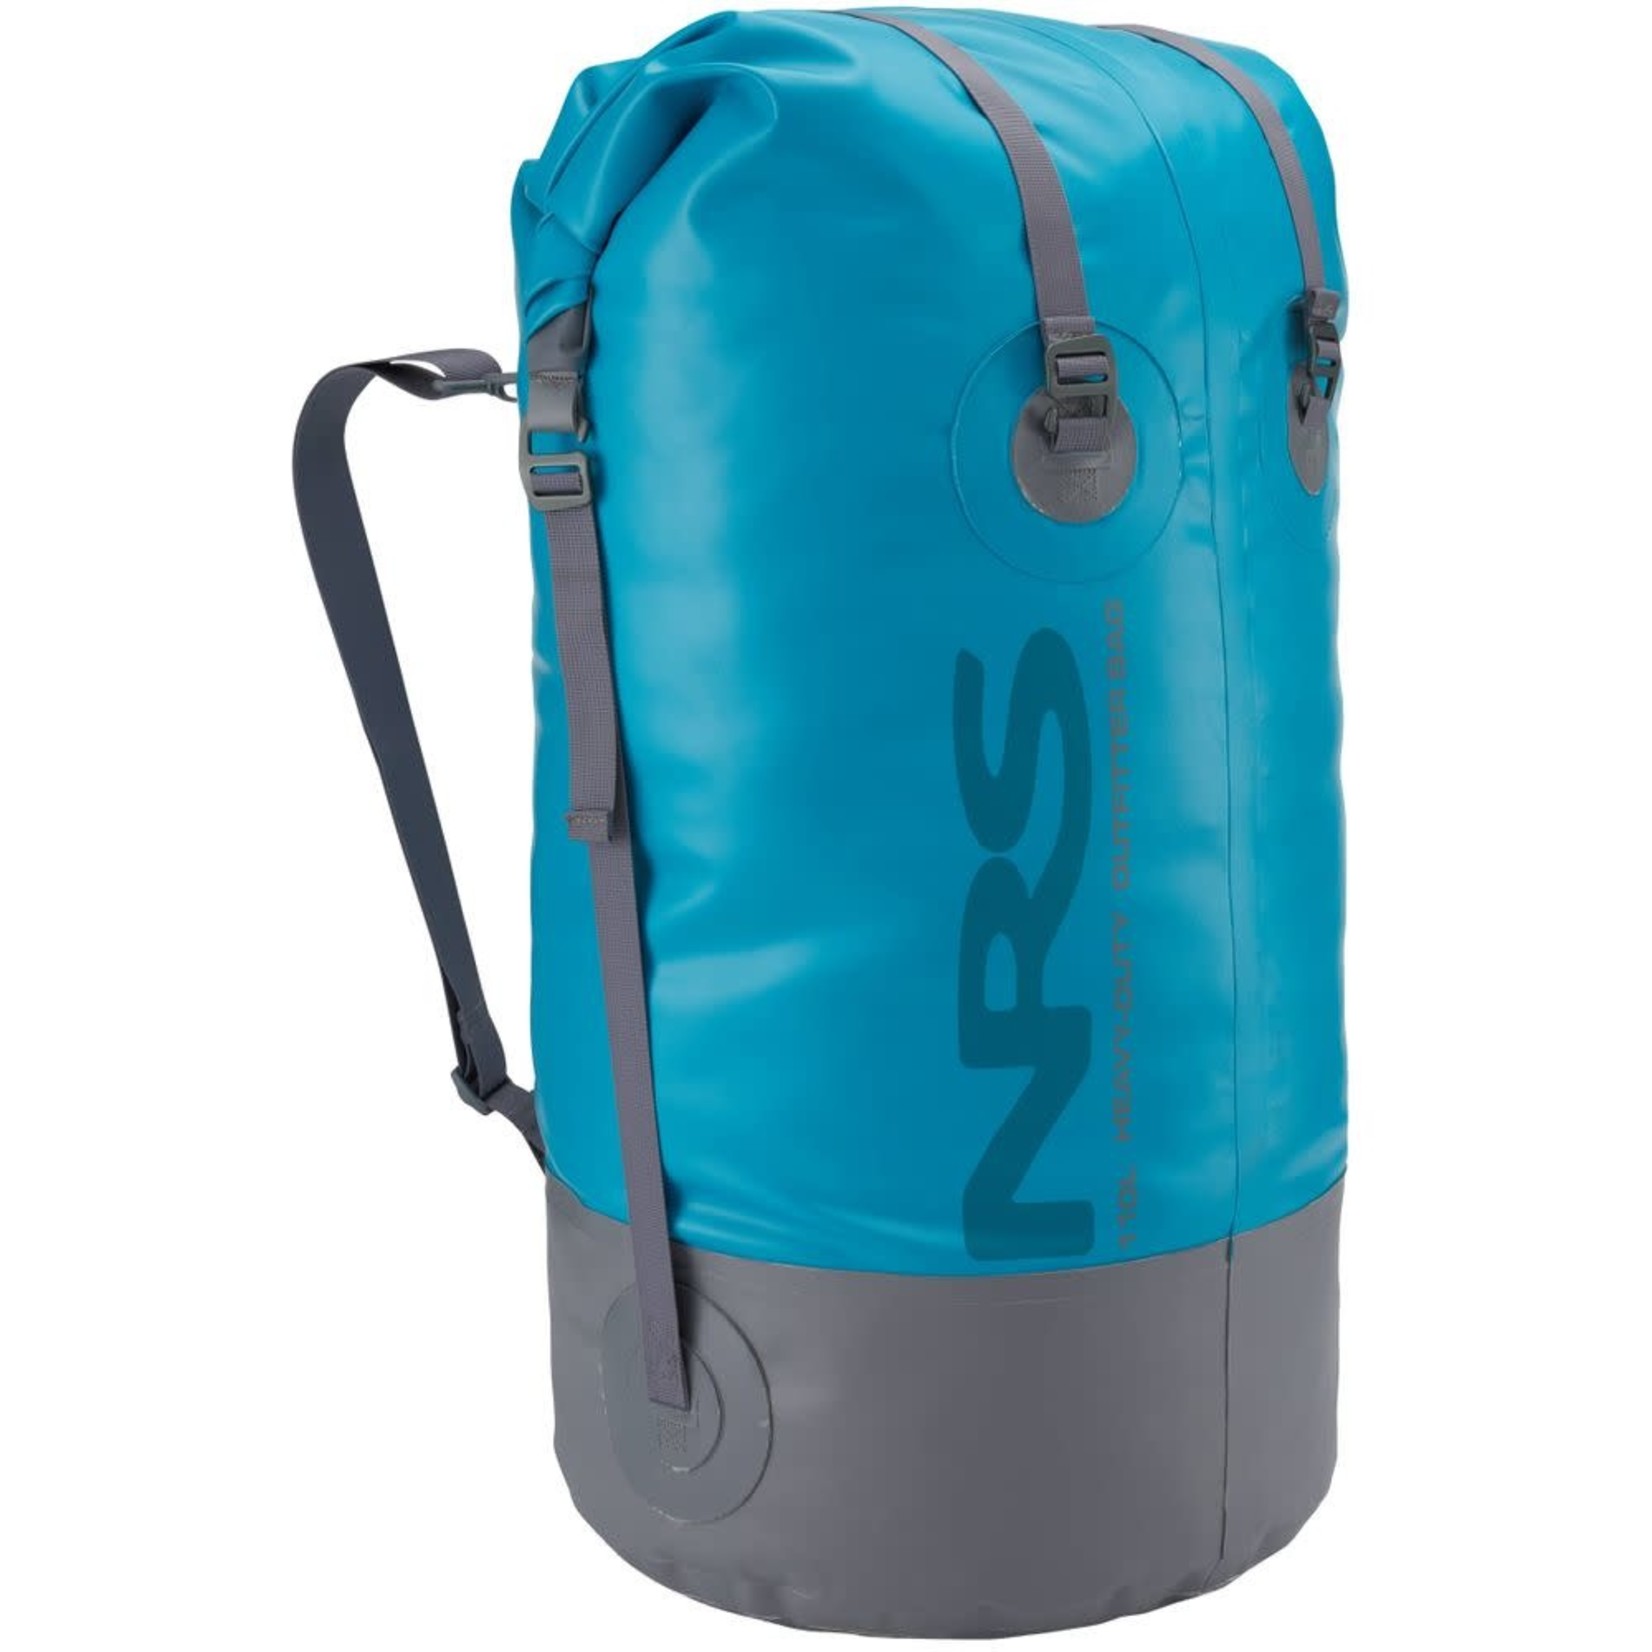 NRS NRS 110 L Heavy-Duty Outfitter Dry Bag